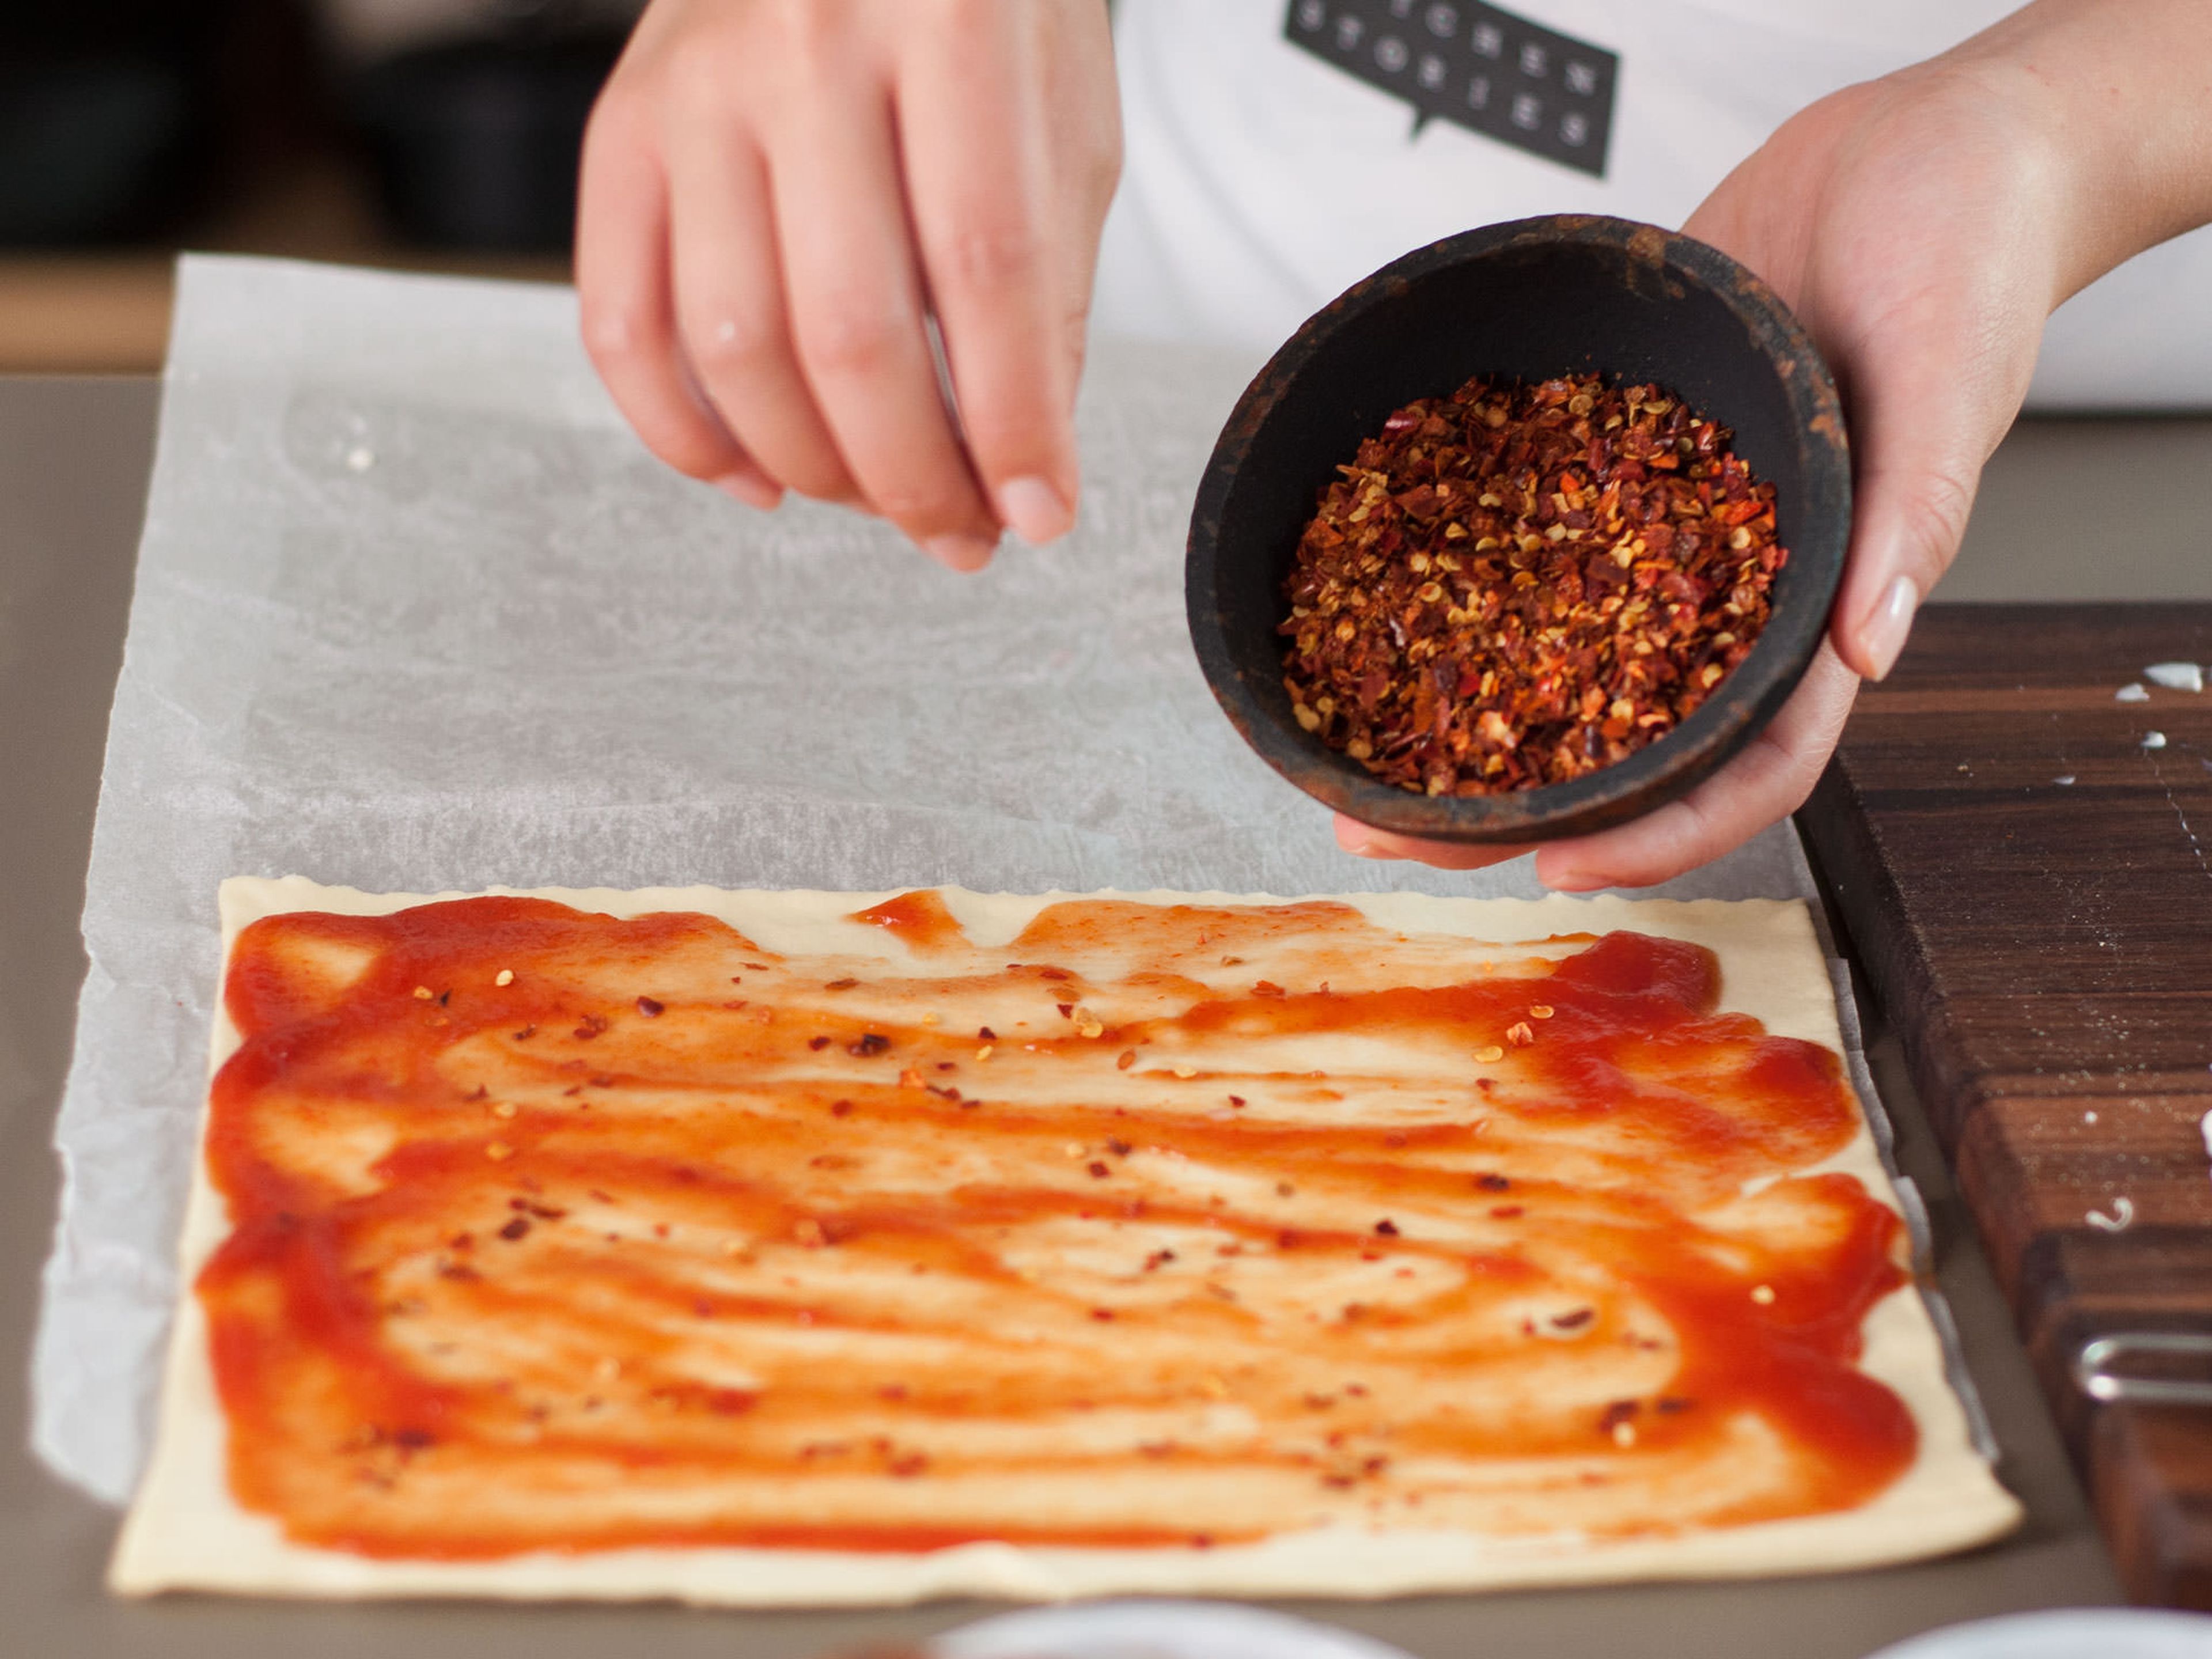 Spread ketchup over other half of the puff pastry. Sprinkle chili flakes on top.